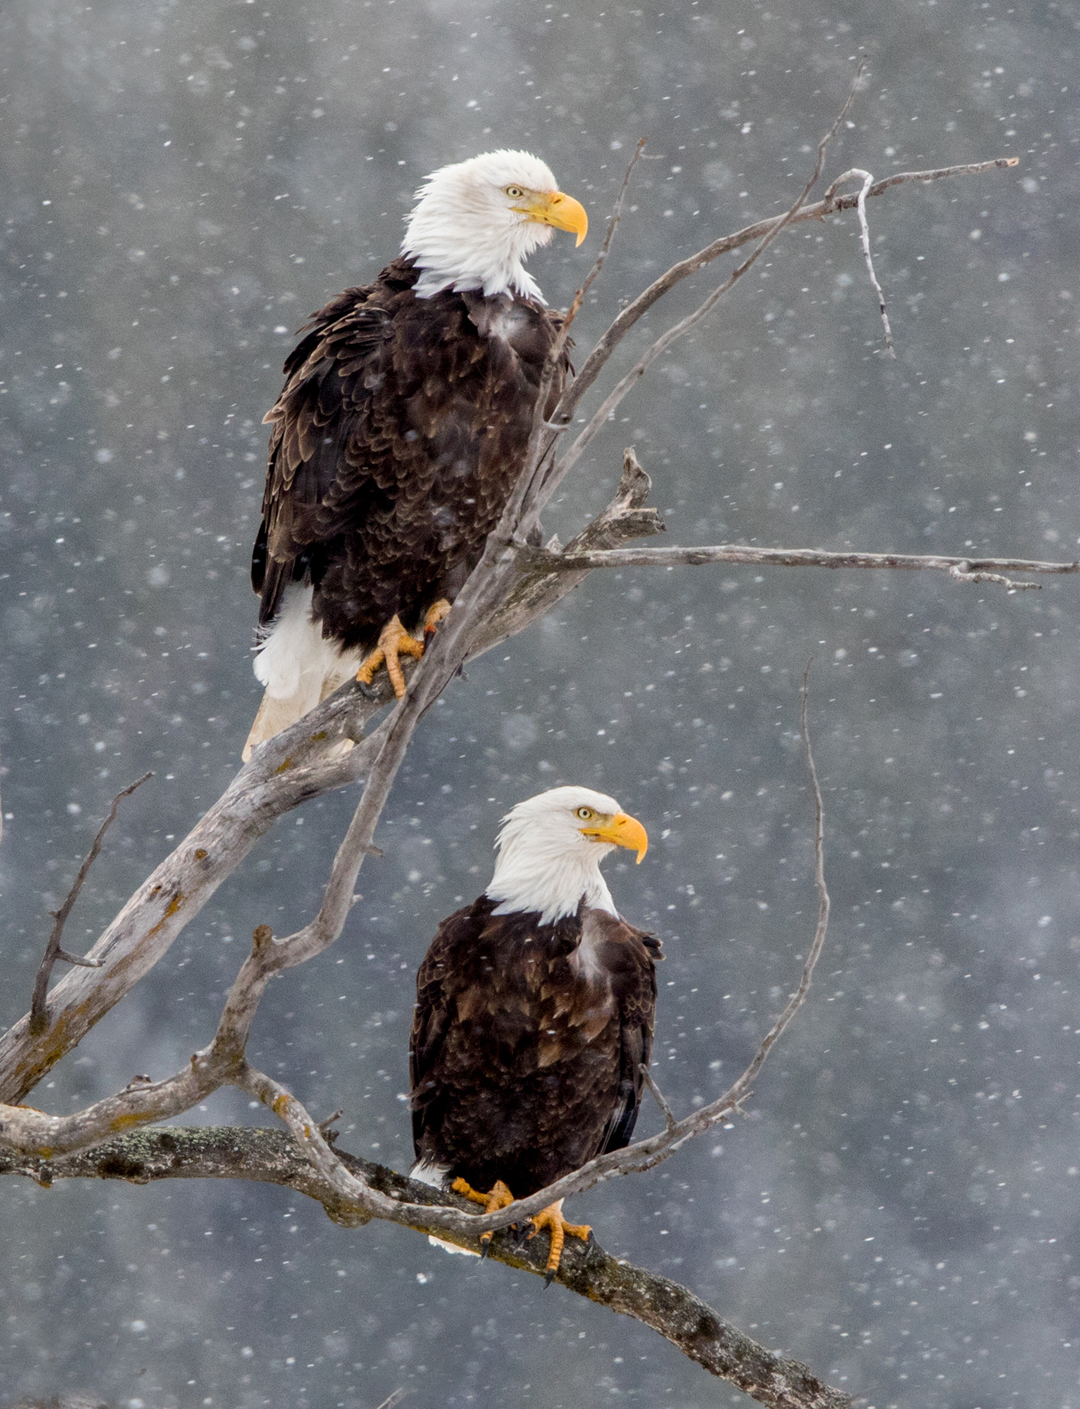 With falling snow and a darkened background, two bald eagles perch in the cottonwood tree.